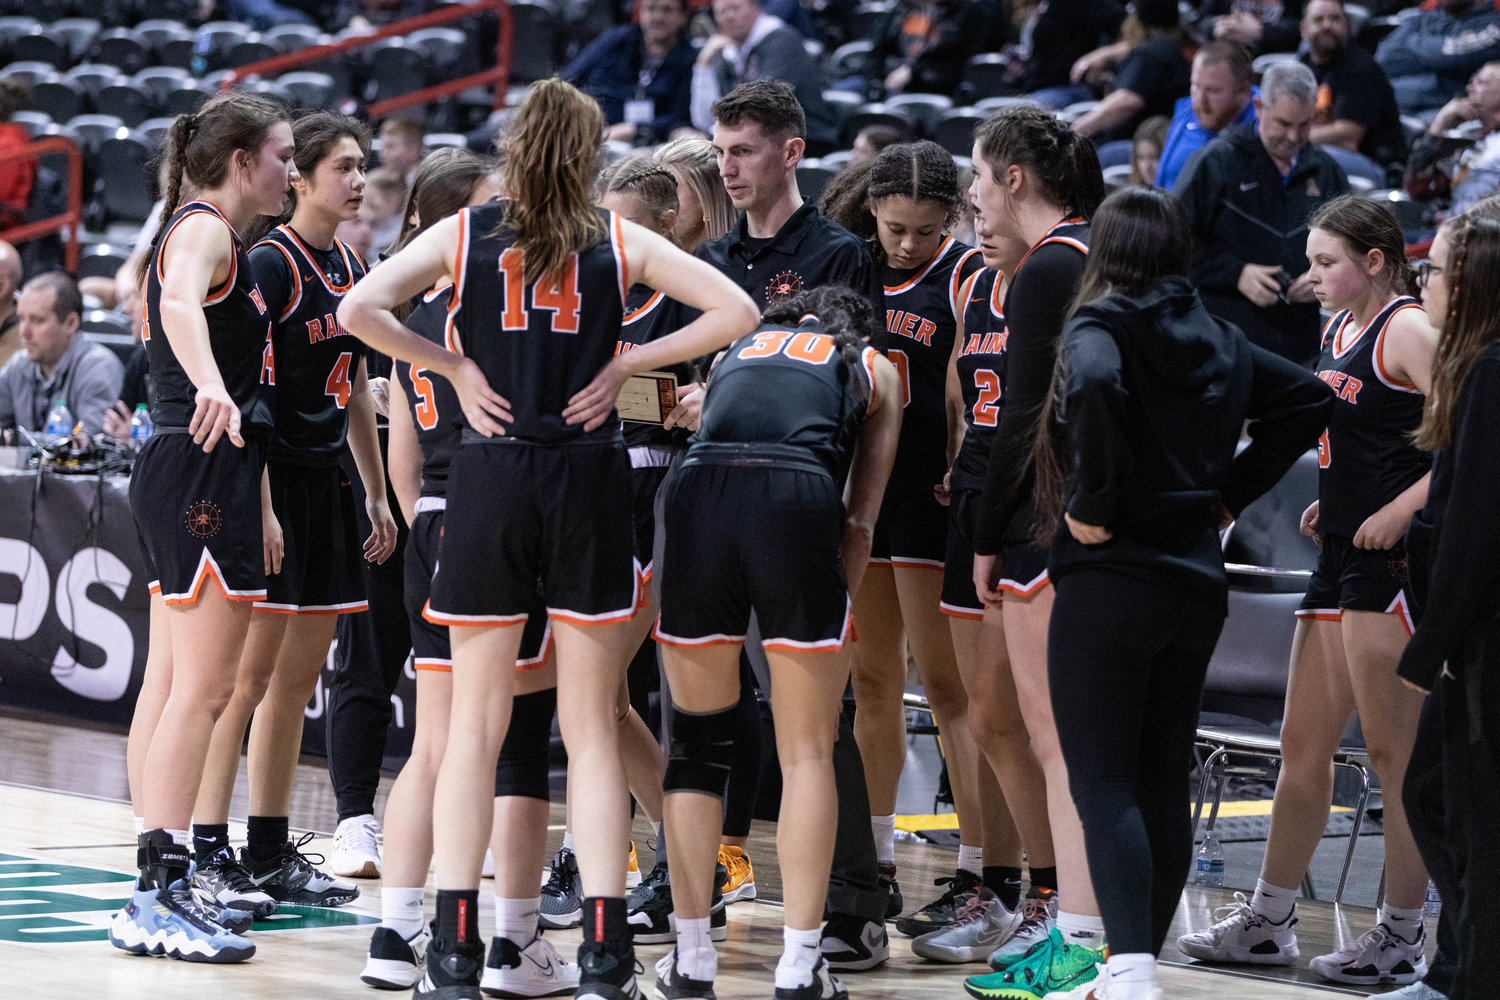 The Rainier girls basketball team huddles during a timeout against Colfax in the 2B state quarterfinals at Spokane Arena March 2.